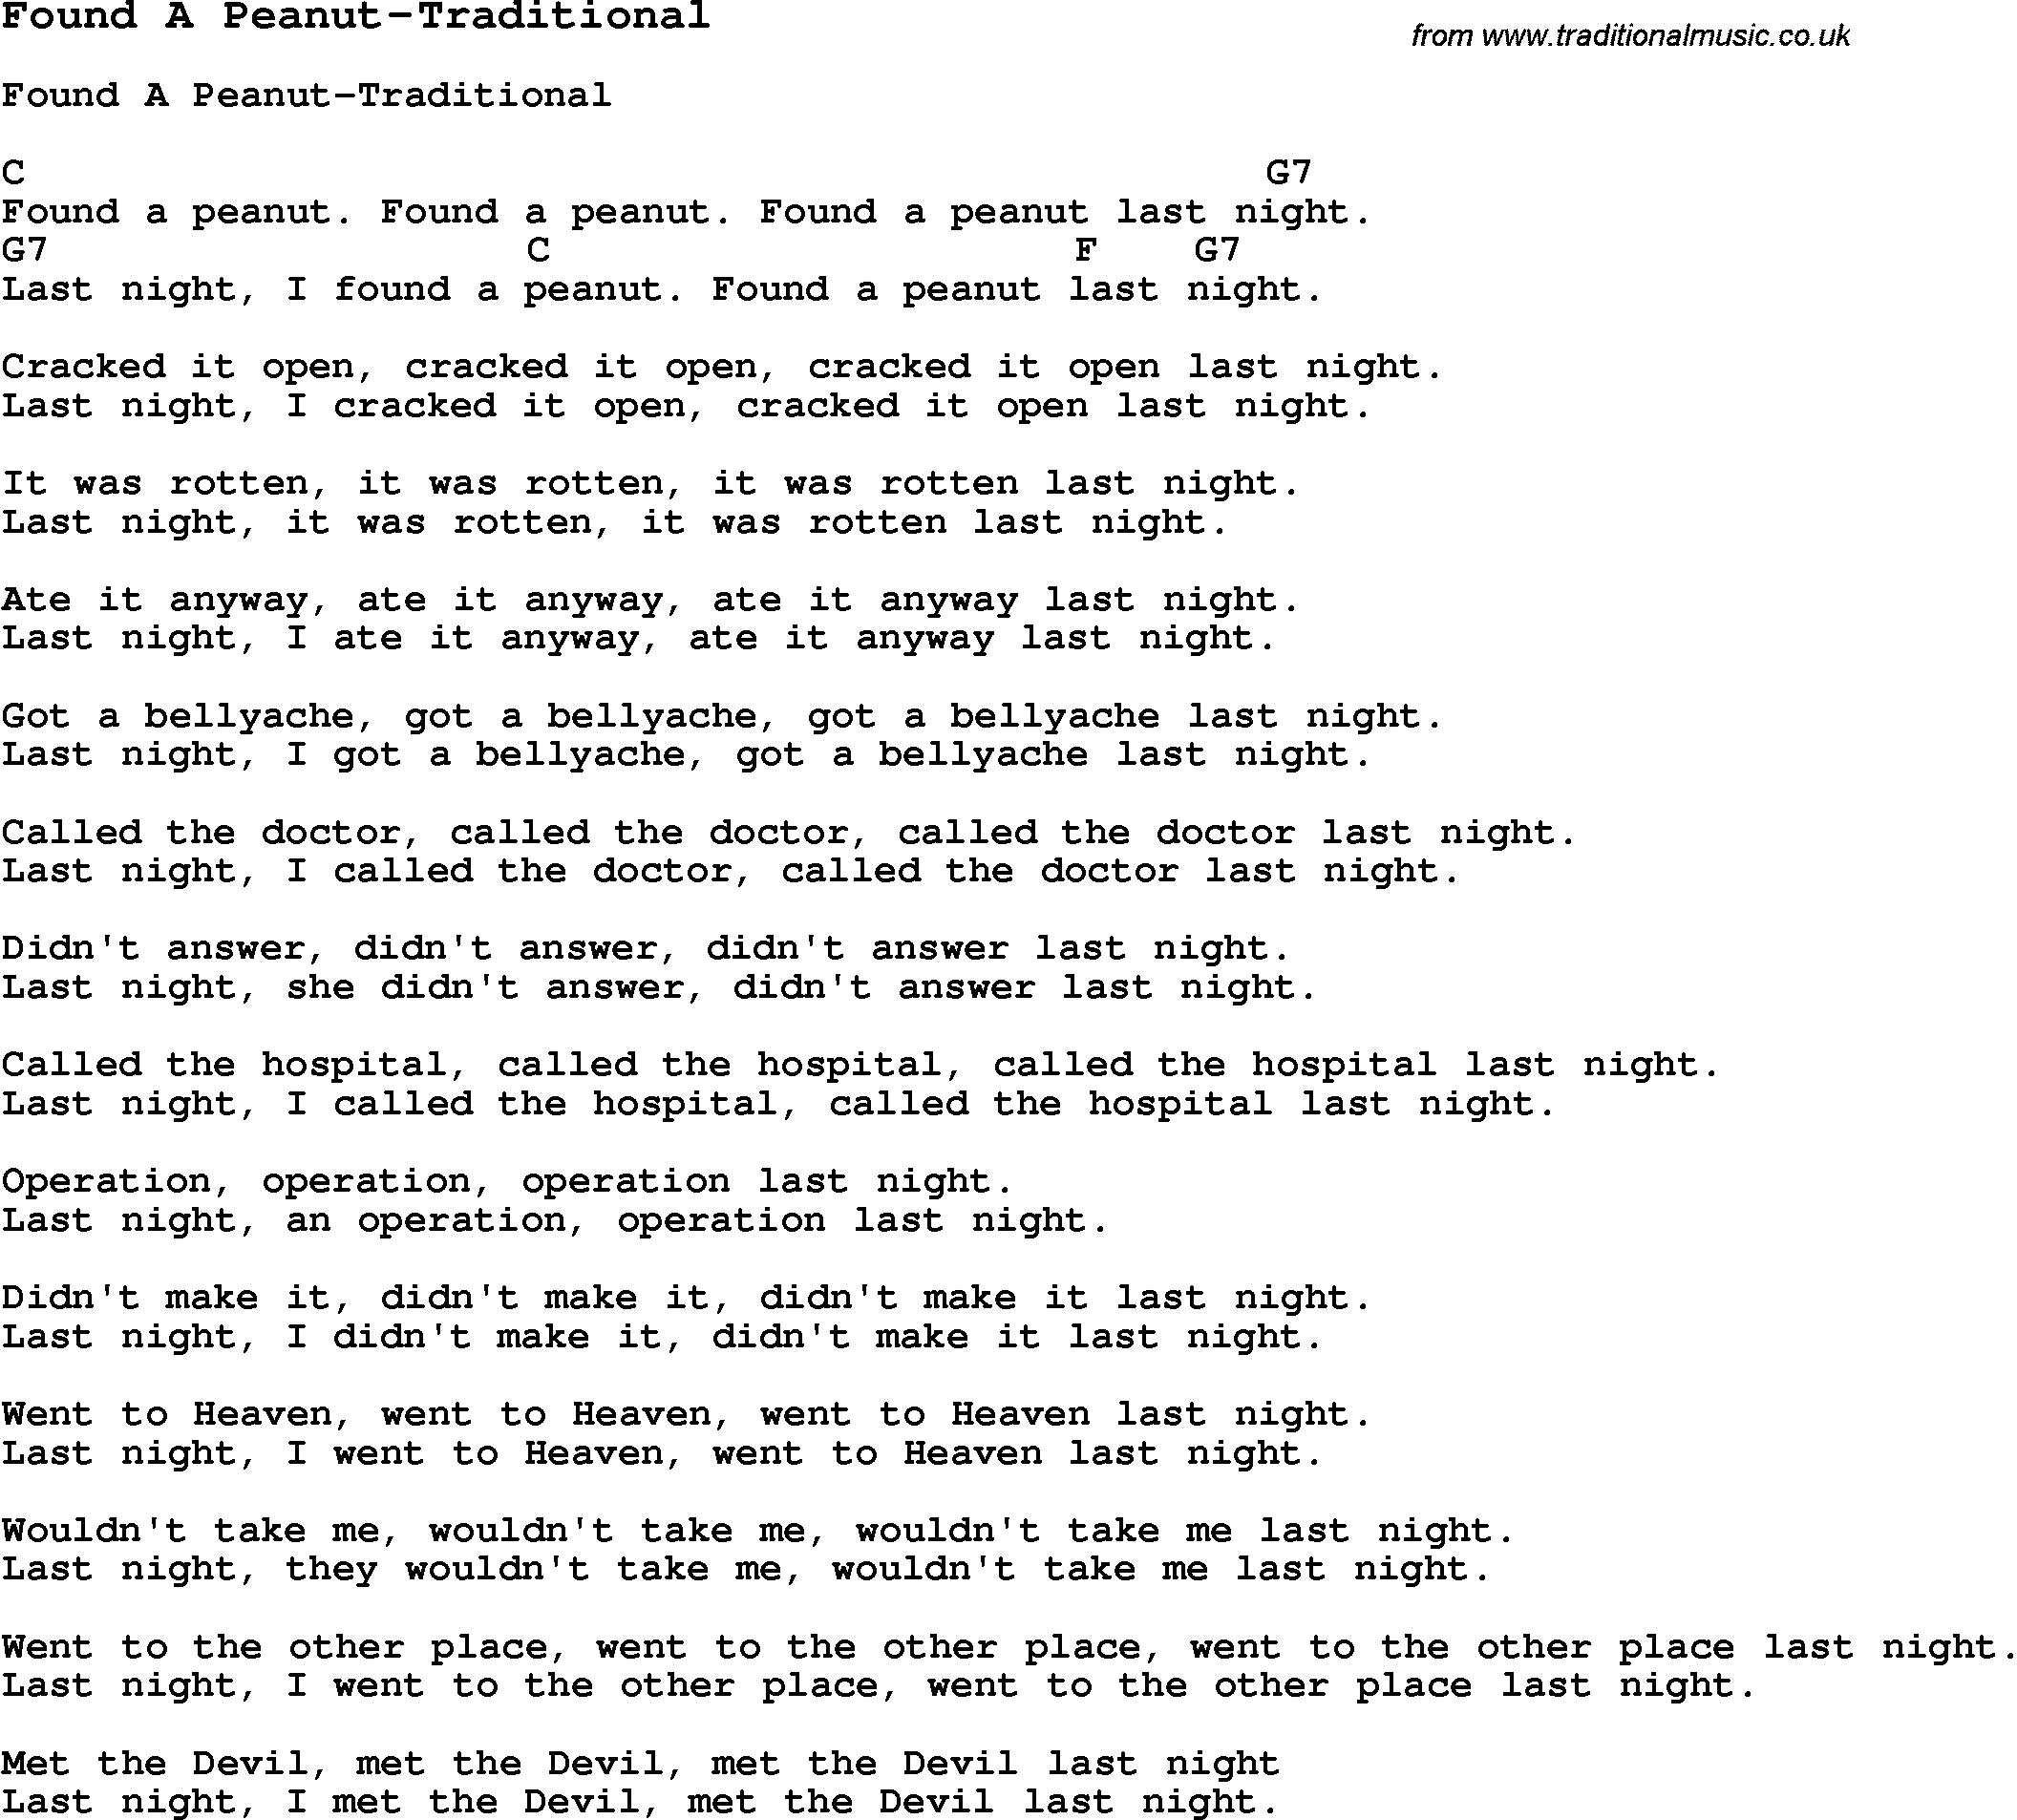 Summer-Camp Song, Found A Peanut-Traditional, with lyrics and chords for Ukulele, Guitar Banjo etc.